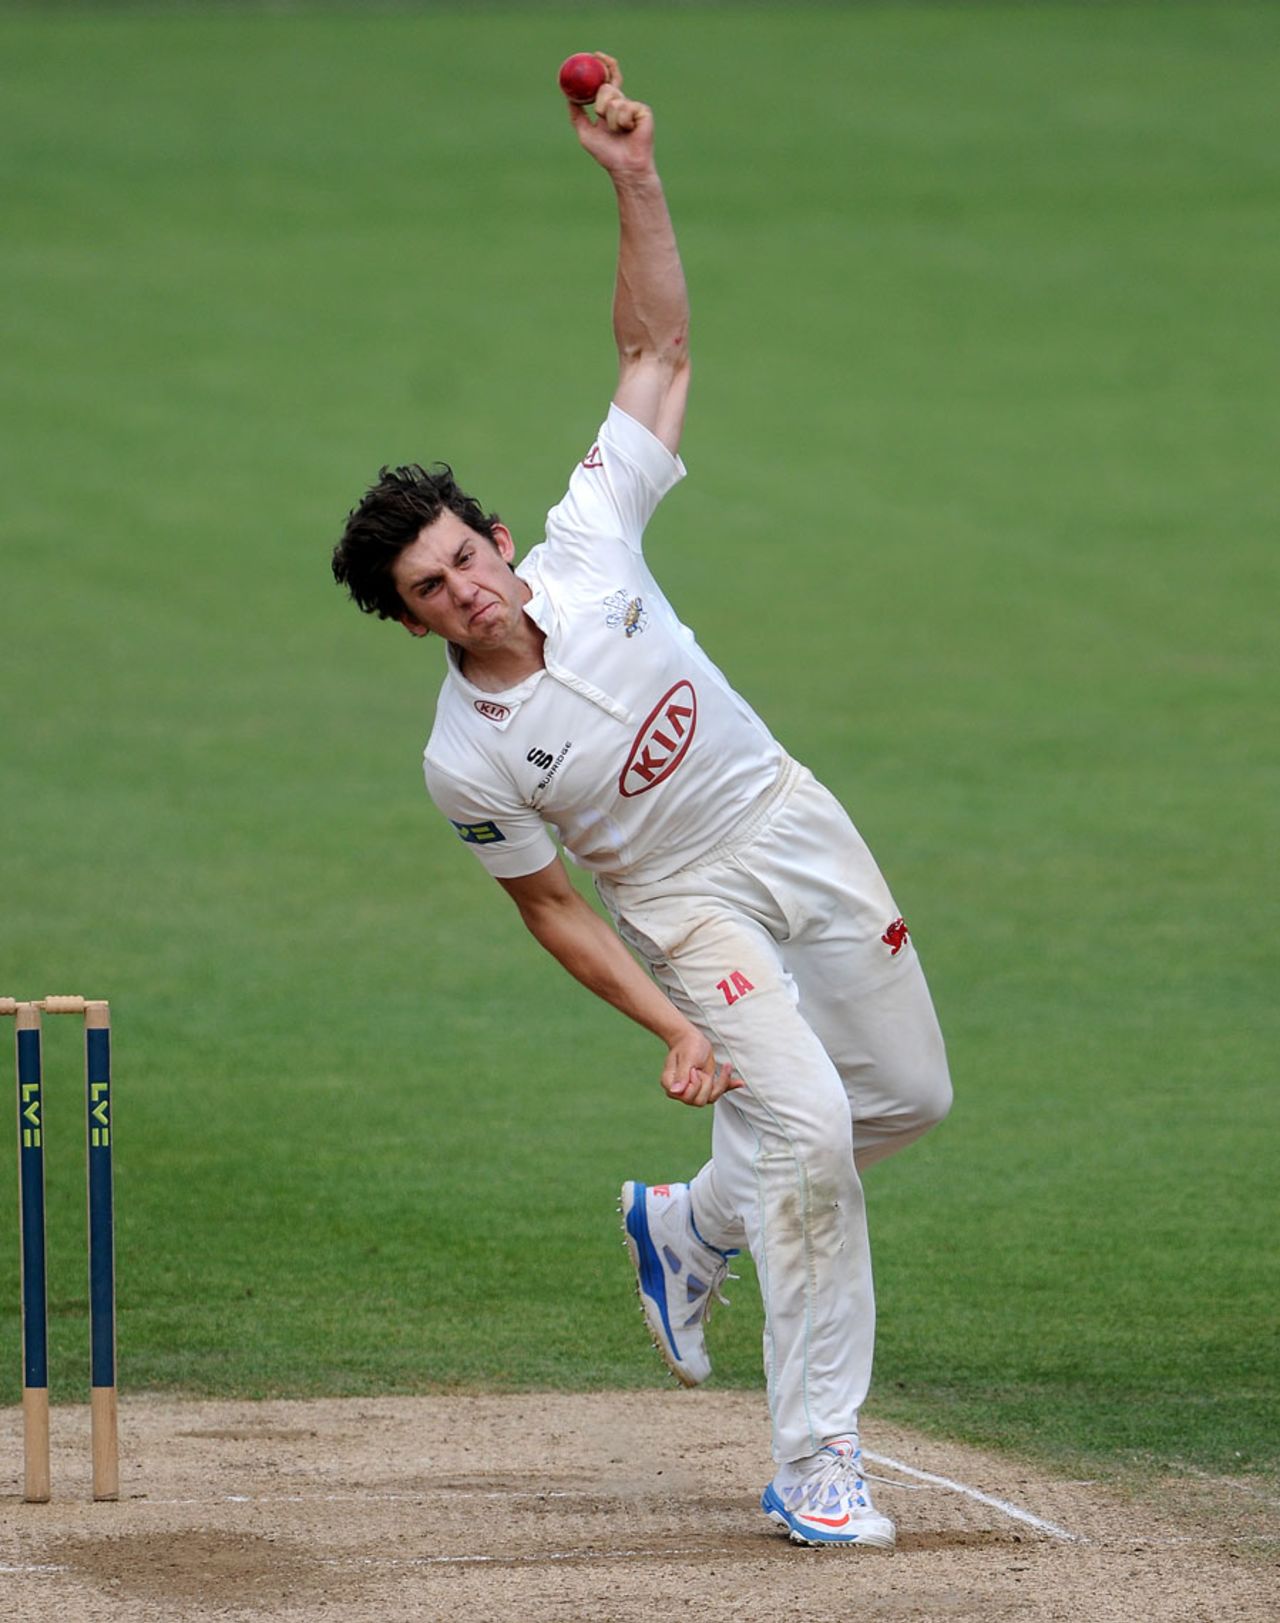 Zafar Ansari took 2 for 35, Surrey v Nottinghamshire, County Championship, Division One, The Oval, 3rd day, July 10, 2013